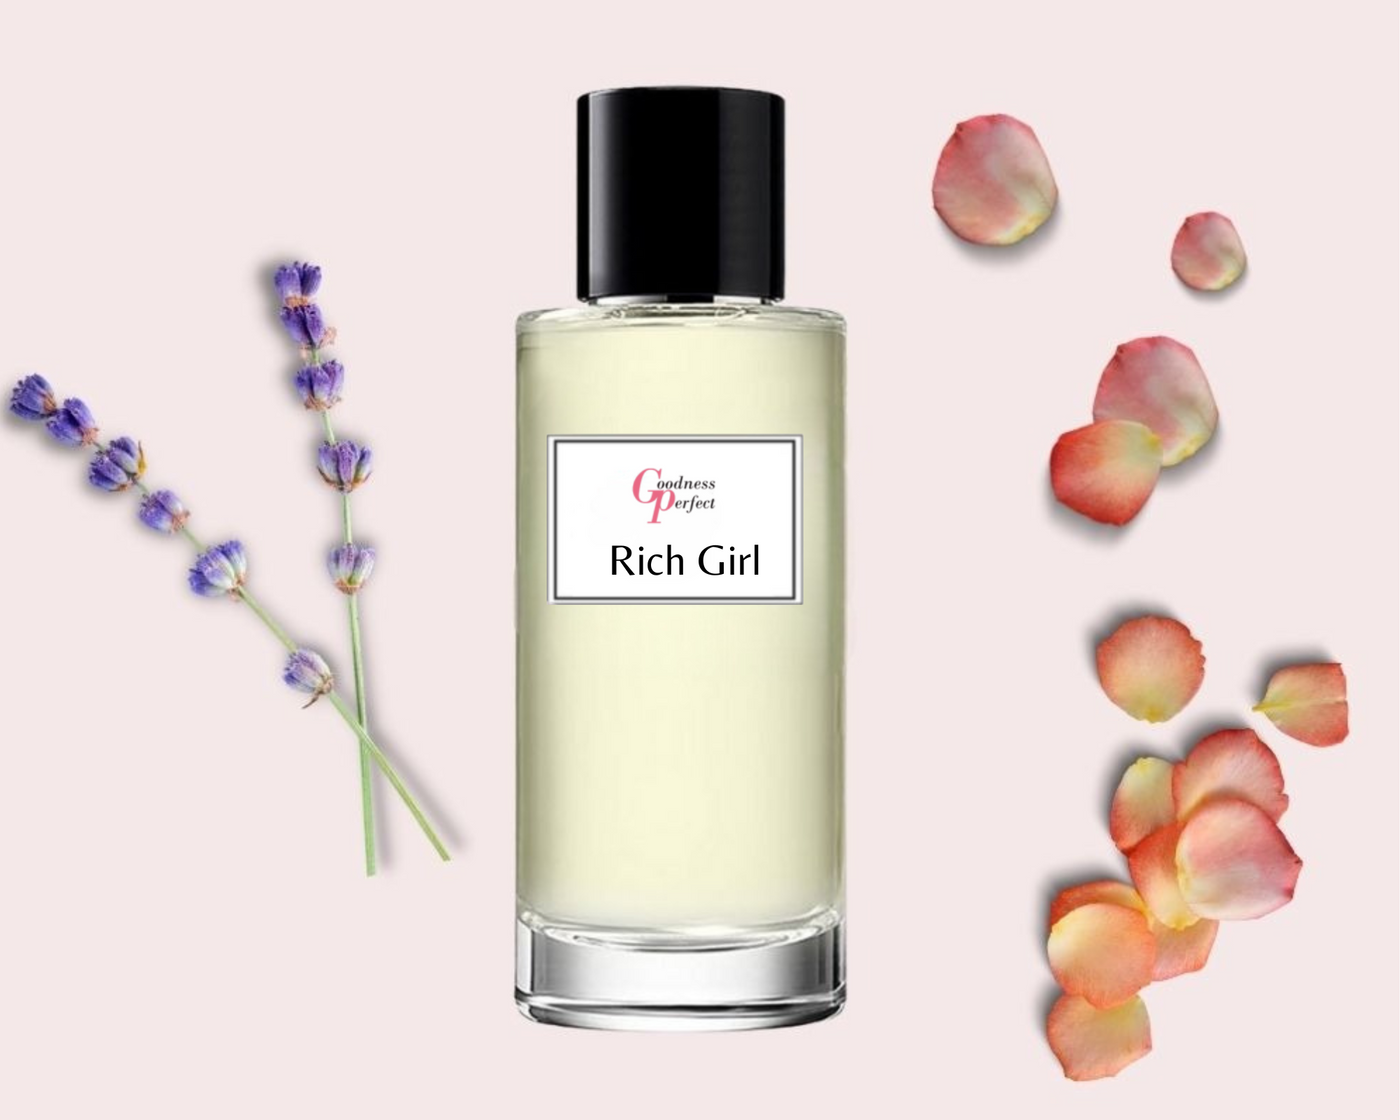 Rich Girl Perfume Inspired by Lady Million